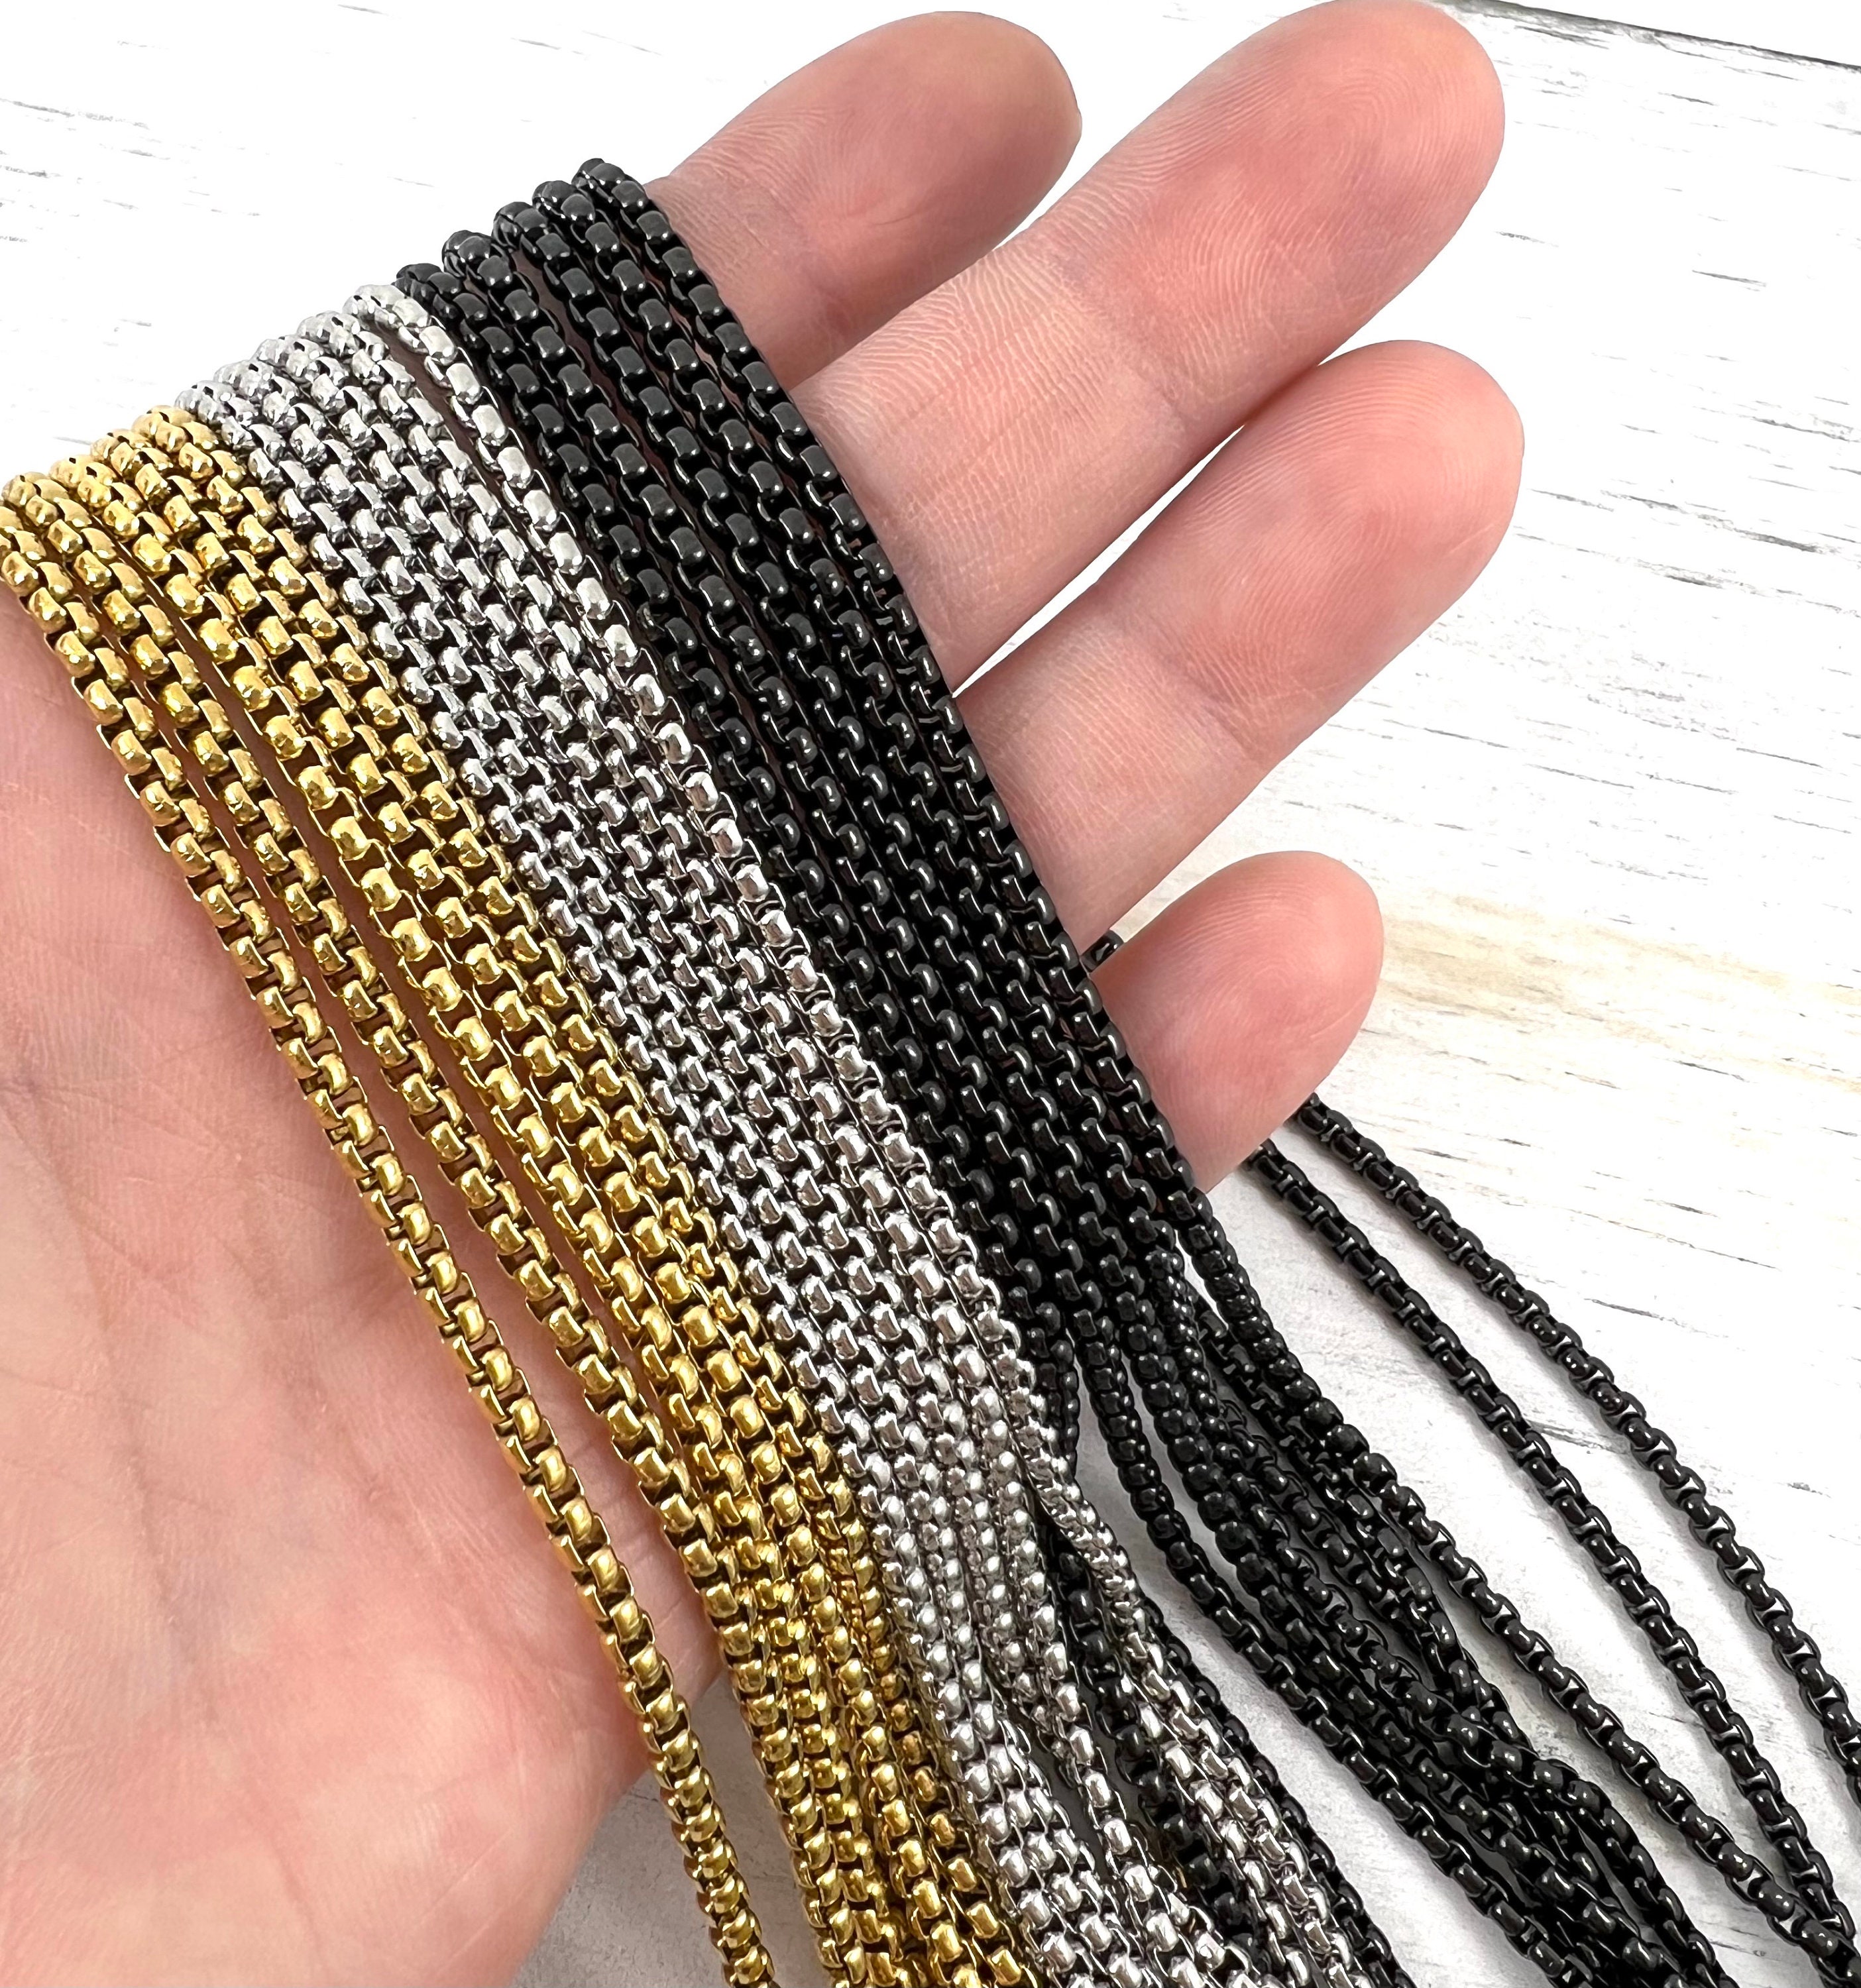 Wholesale 12 PCS Stainless Steel Flat Cable Chain Finished Necklace Chains  Bulk for Jewelry Making18-30 Inches 